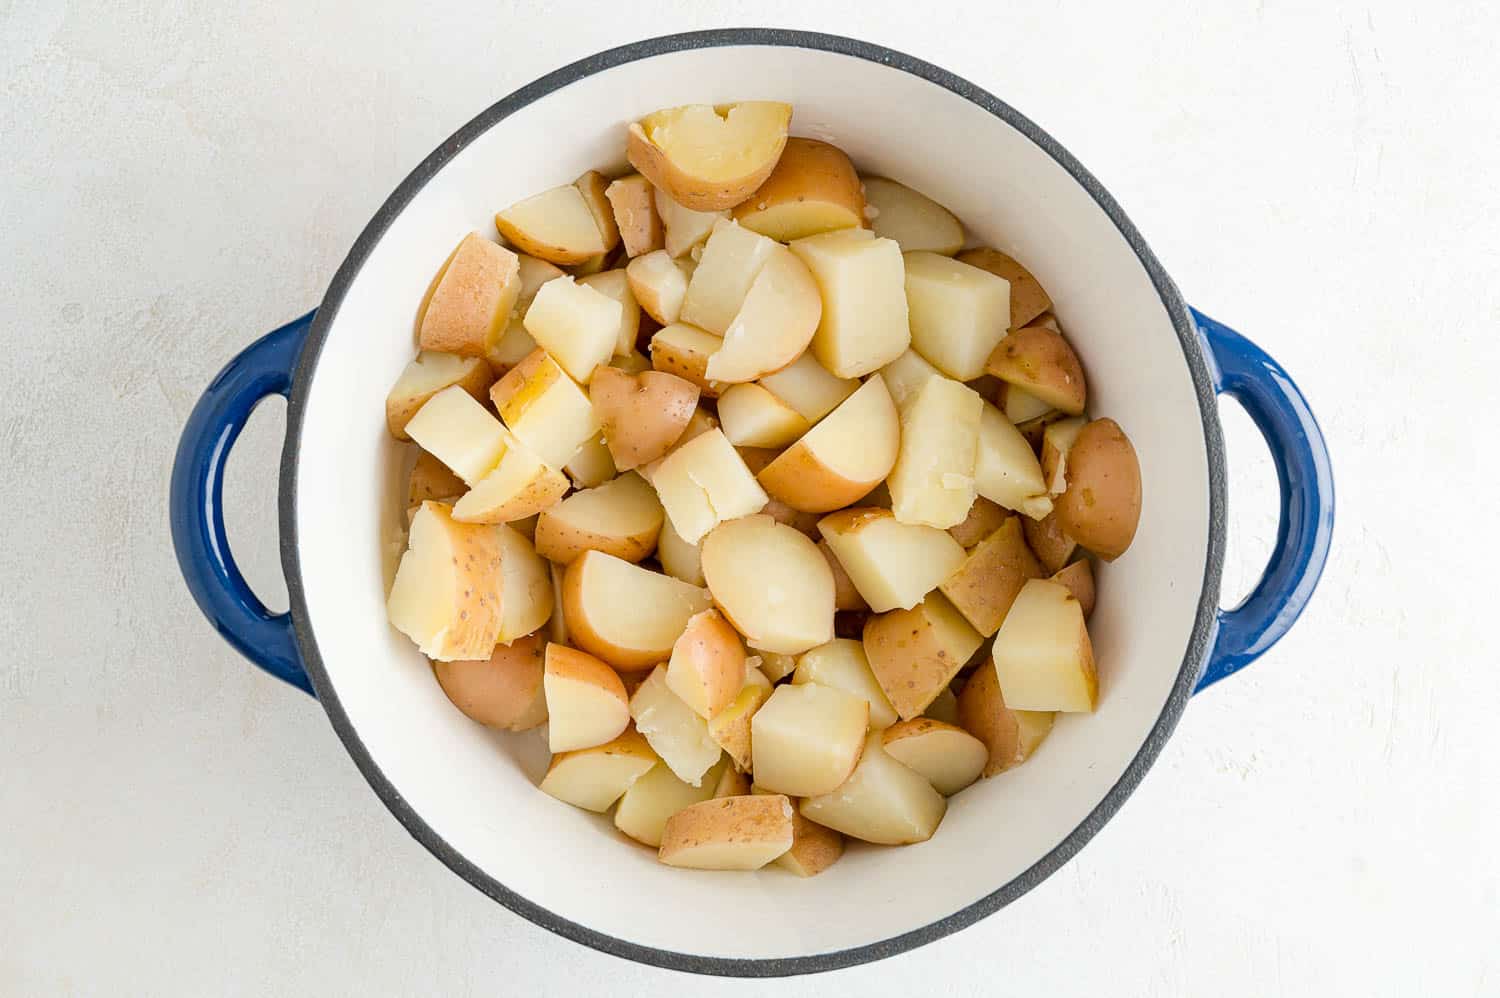 Cooked diced potatoes that have been drained.